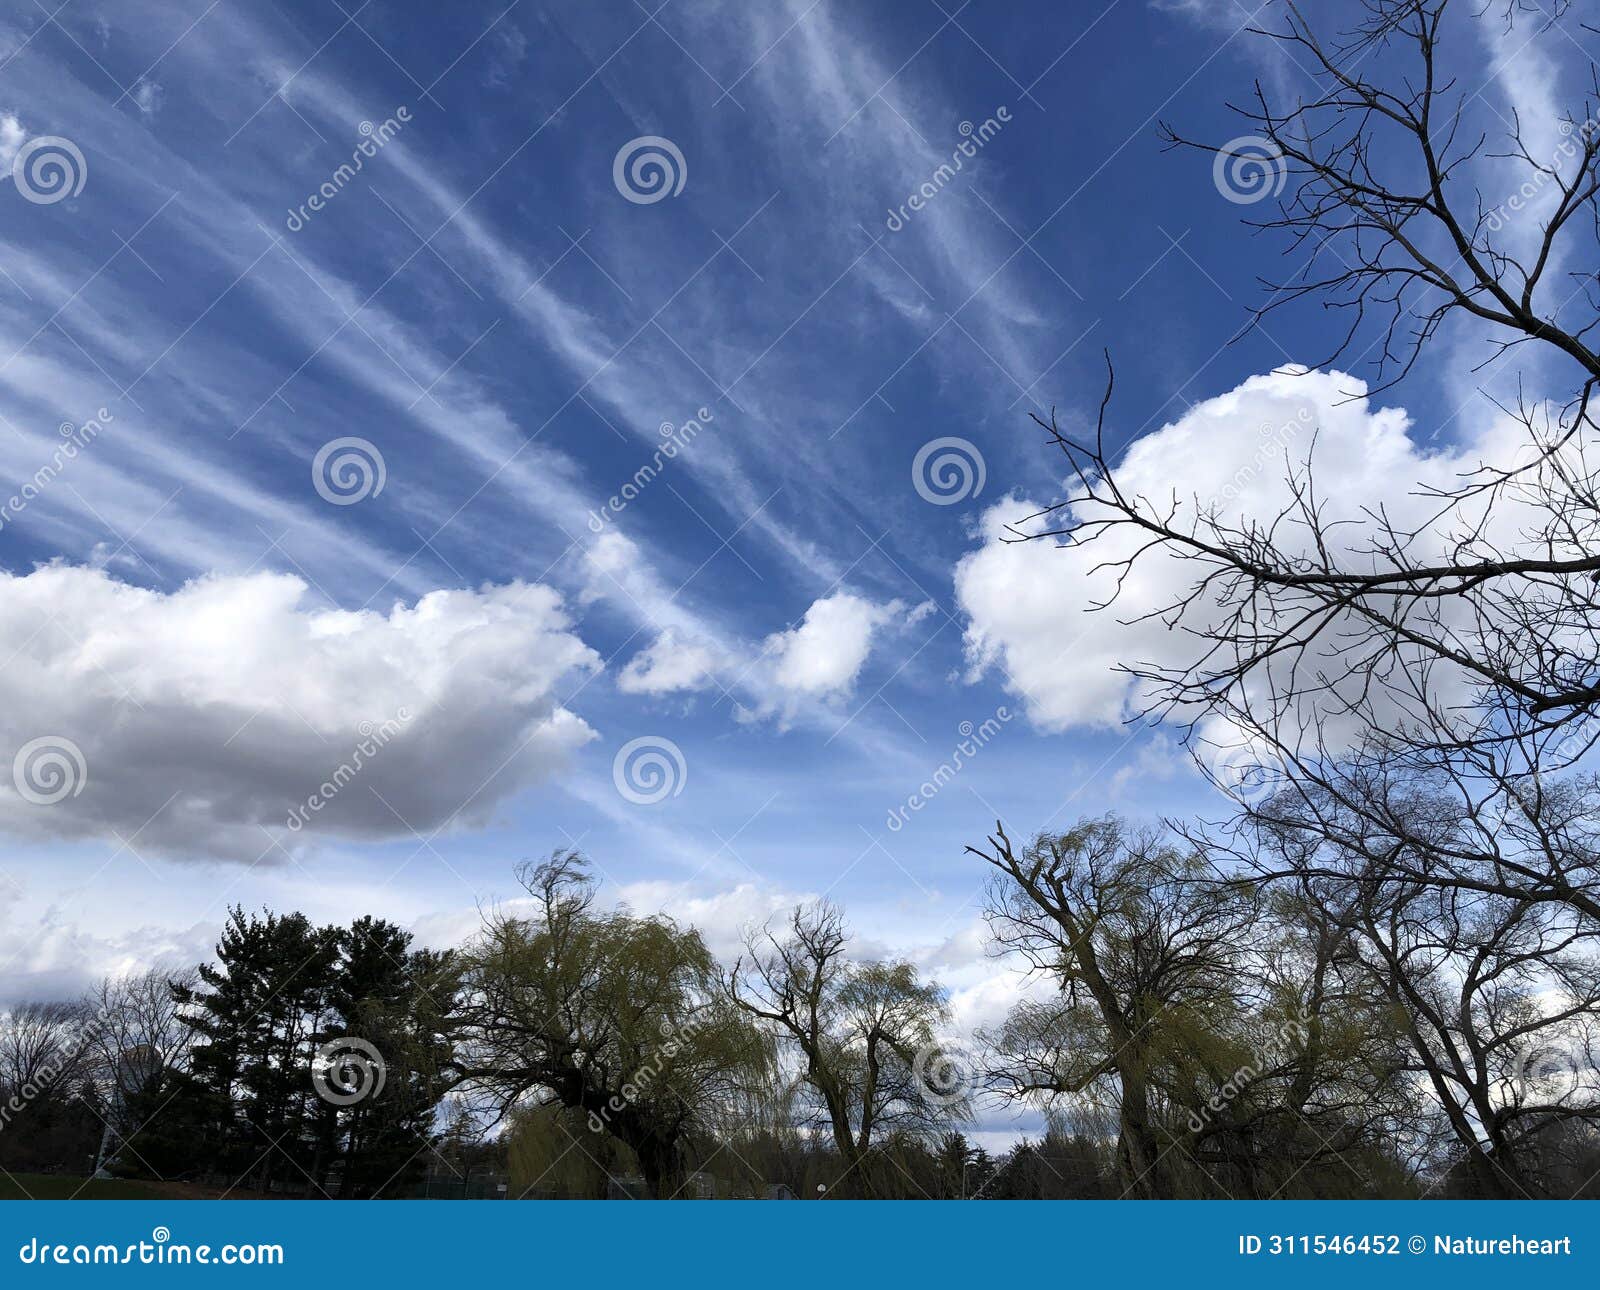 deep blue sky with various white clouds 3